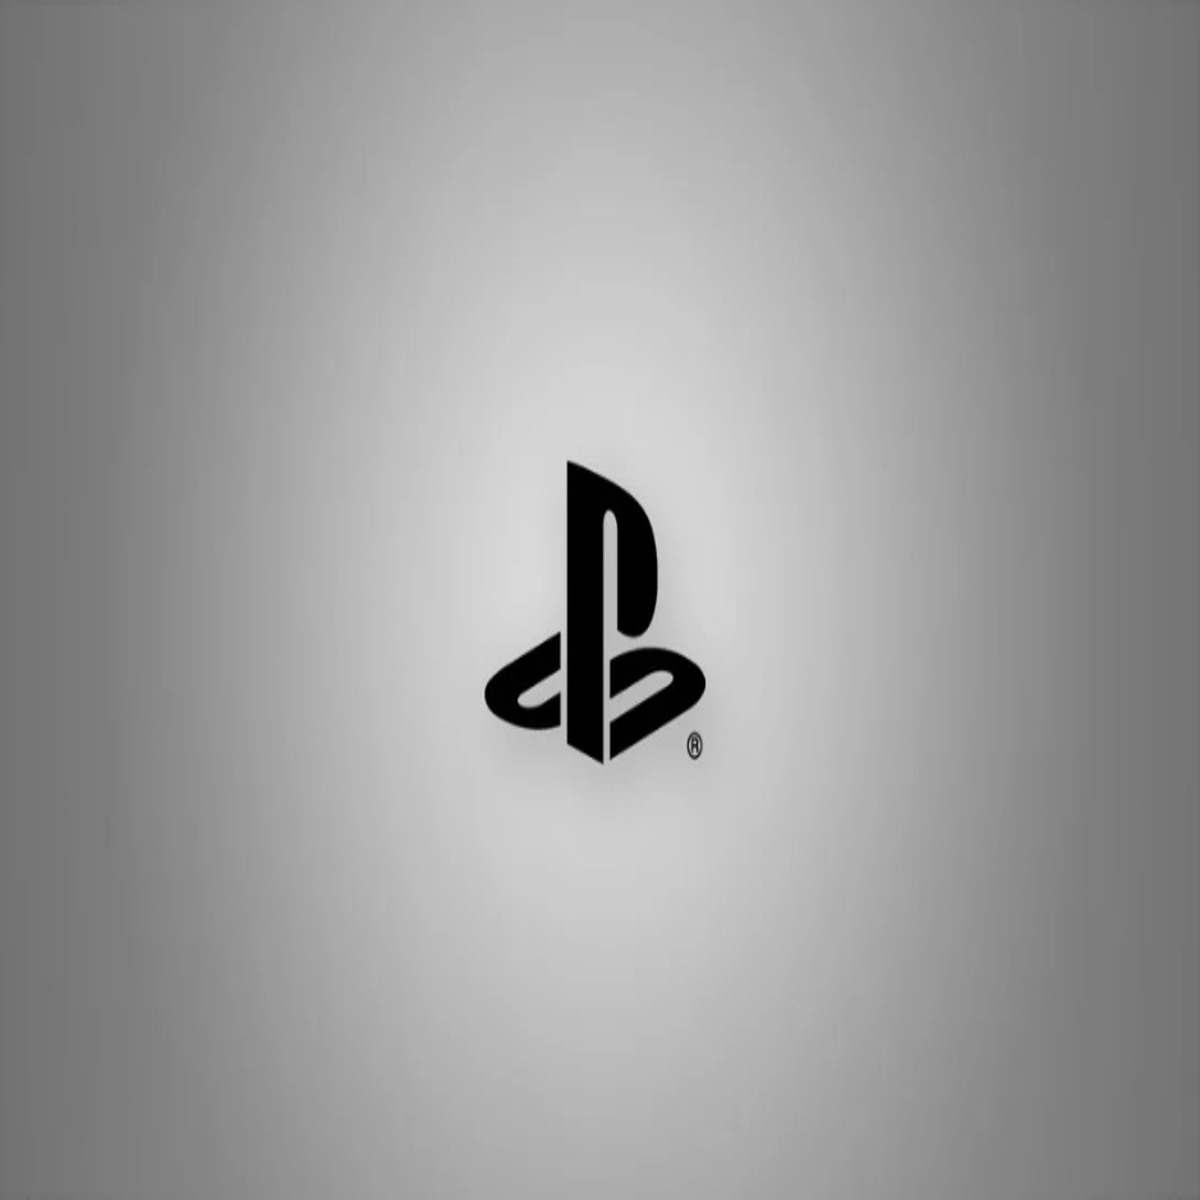 People are getting banned from PlayStation Network for seemingly no reason  - Games